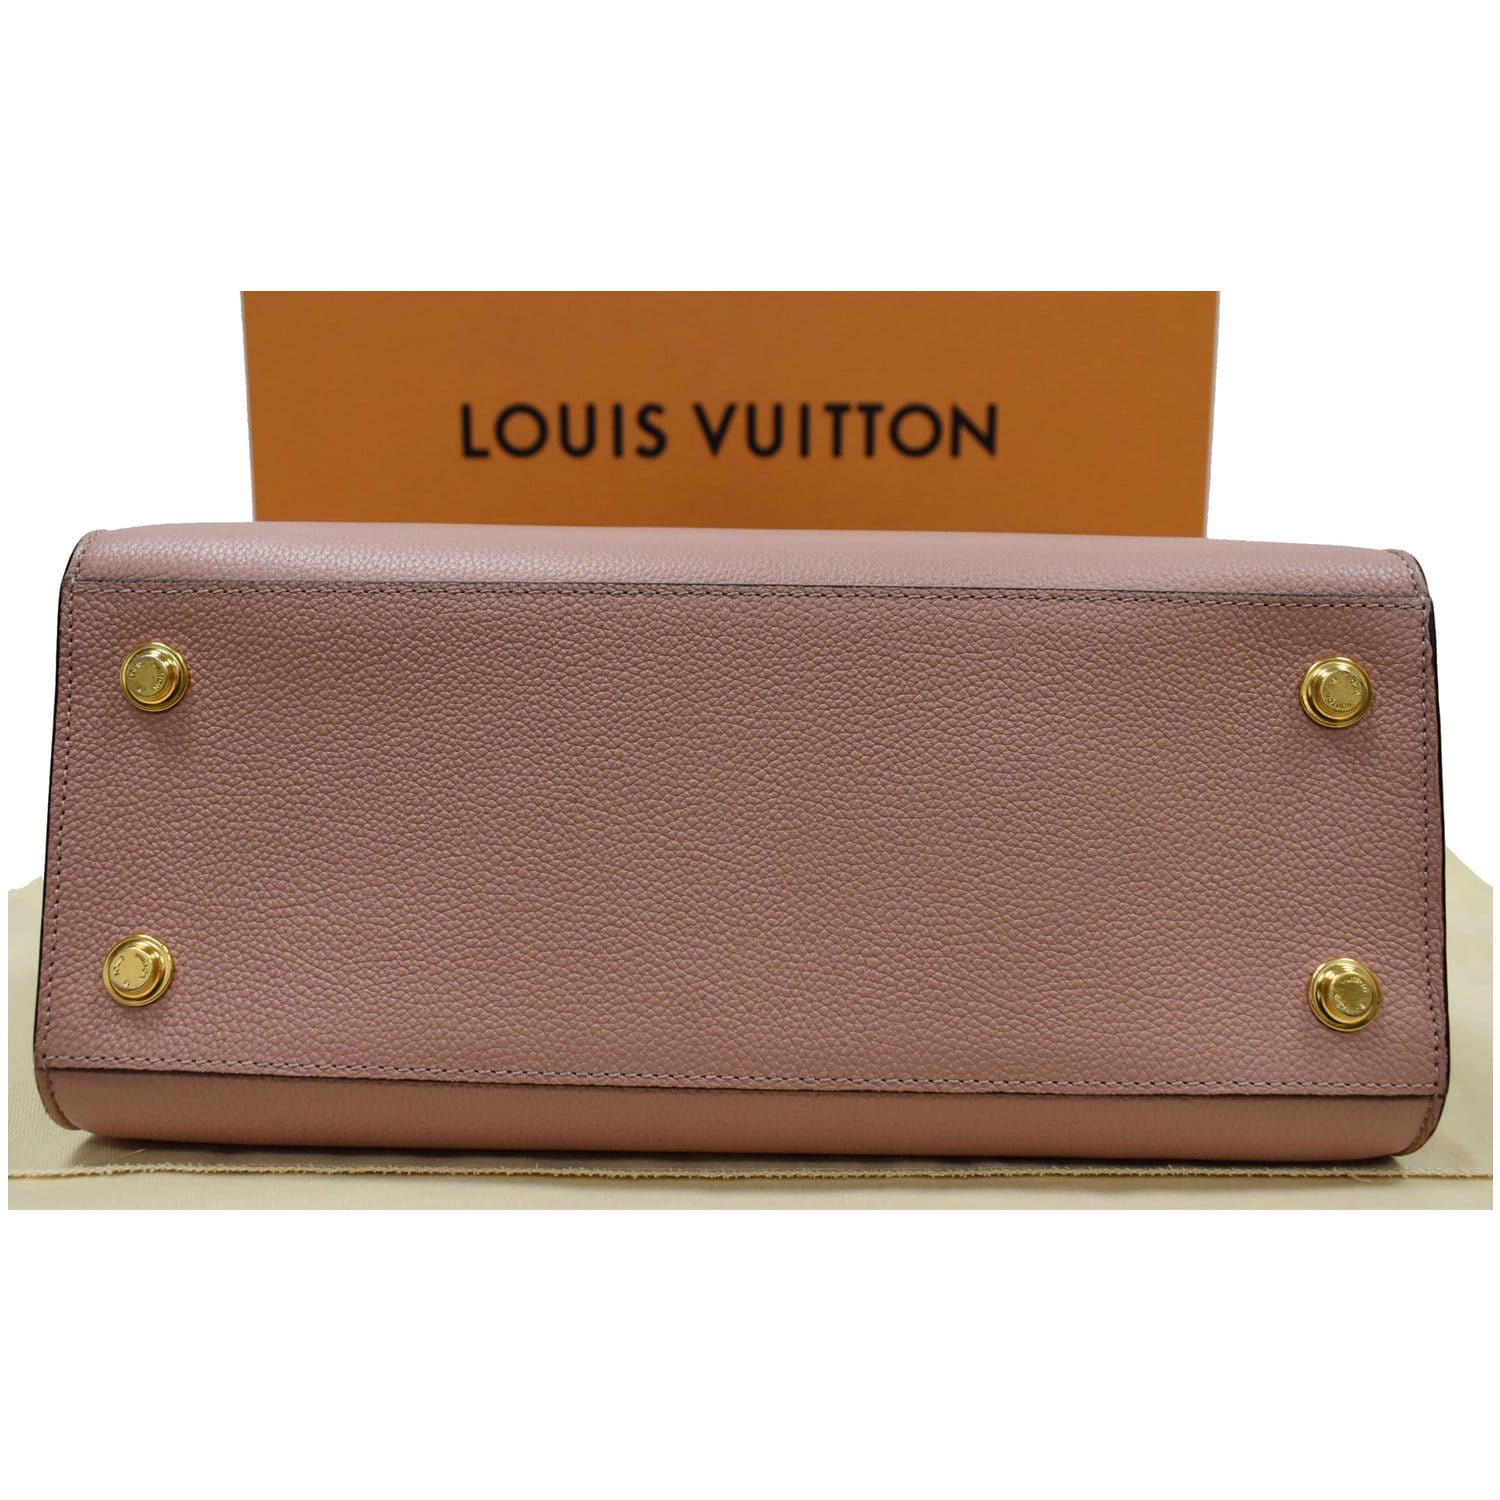 Louis Vuitton City Steamer MM Taurillon leather